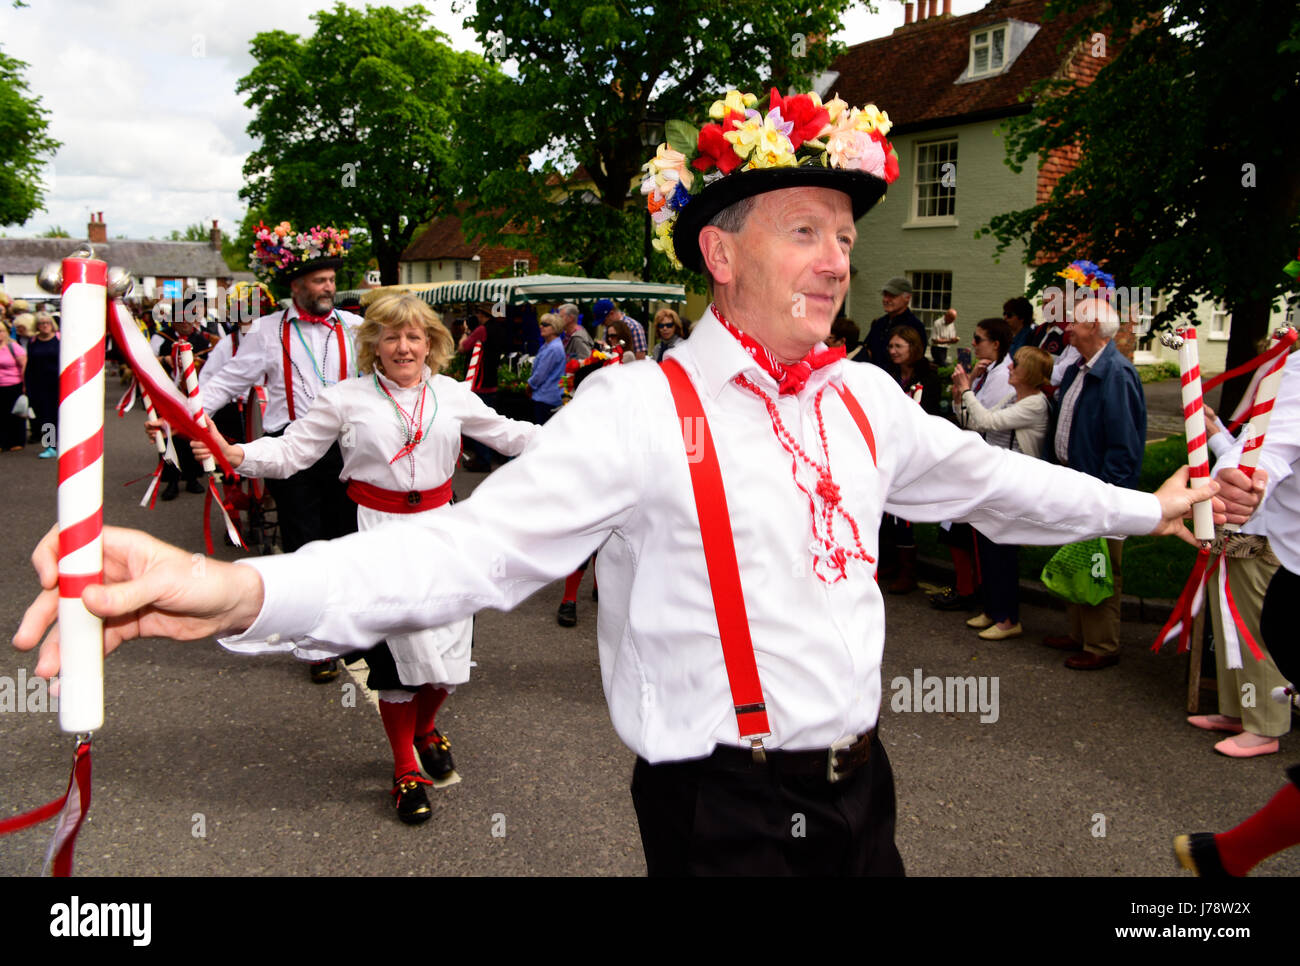 Alresford, 13th annual Watercress Festival, dancers parade through the town along Broad Street, Alresford, Hampshire, England. Stock Photo